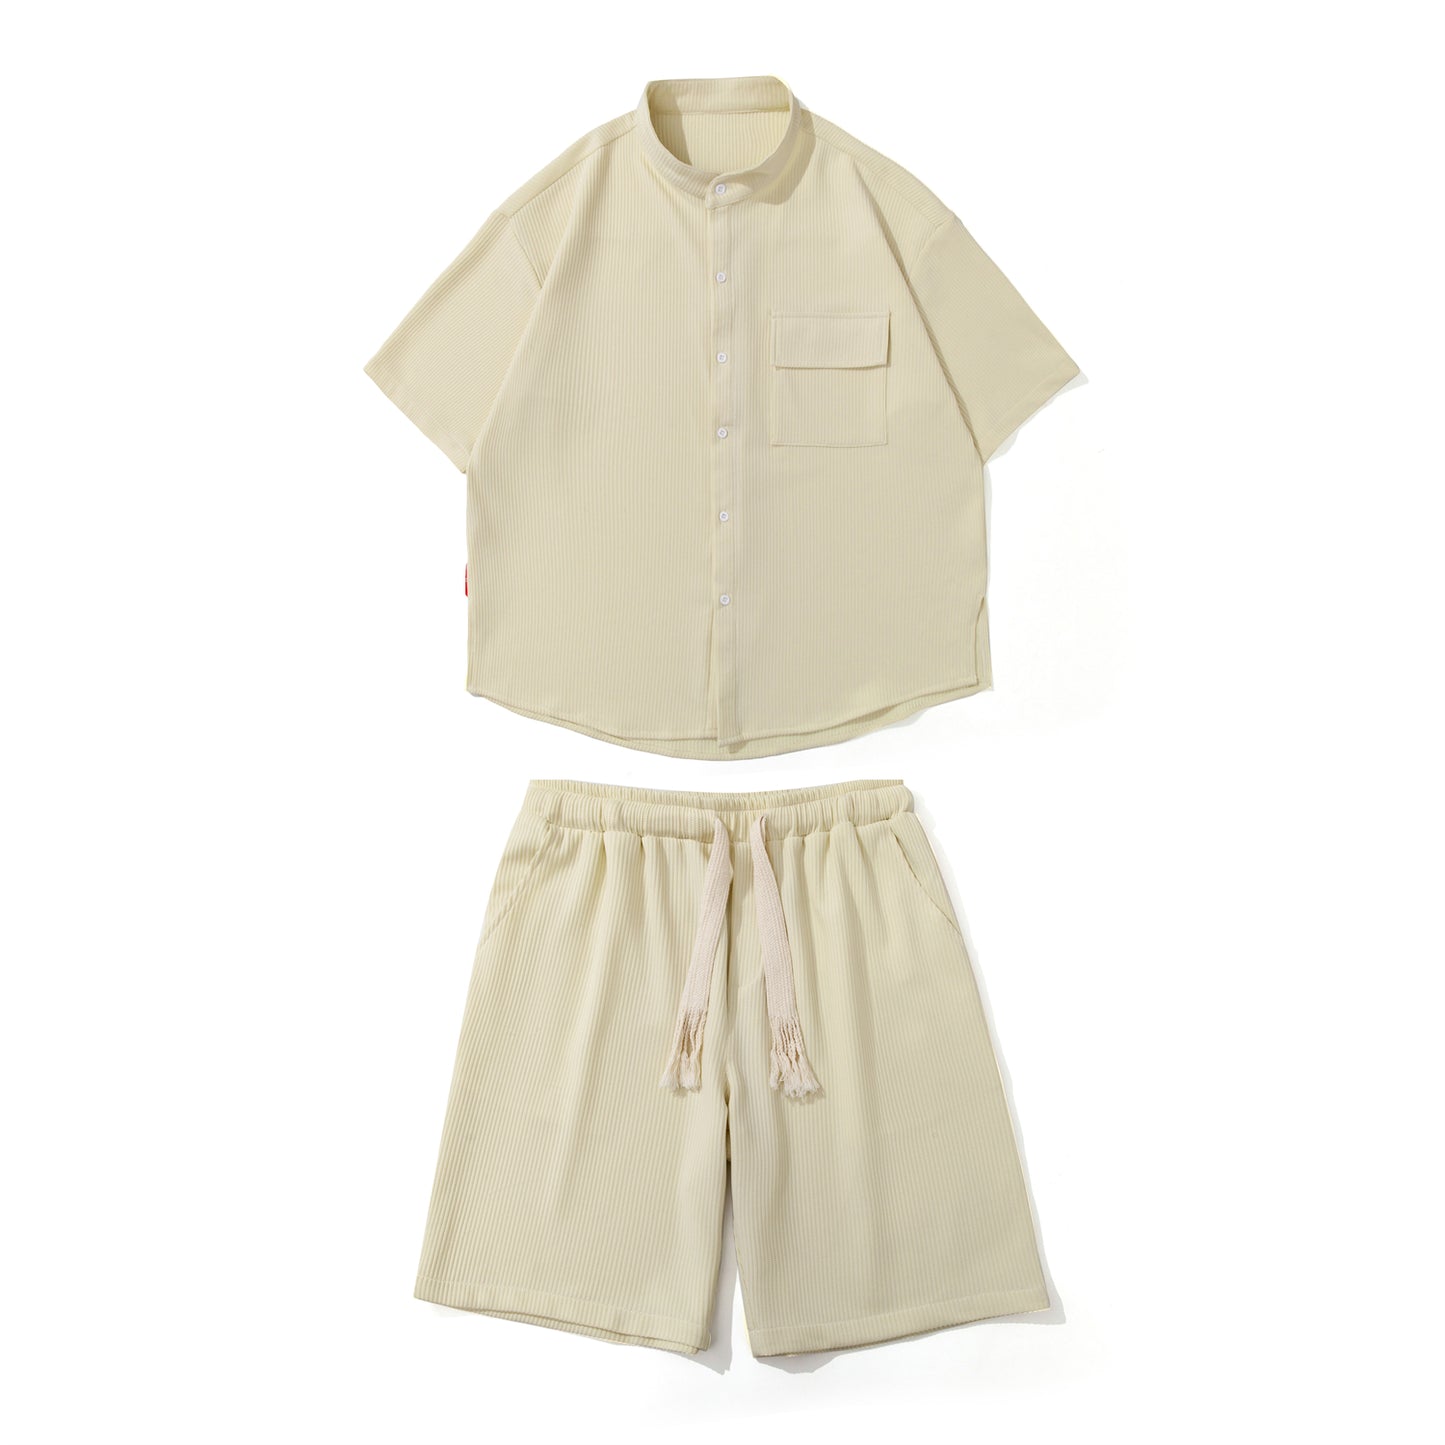 Men's Summer Two-Piece Ice Silk Suit - Solid Color Short-Sleeved Shirt & Drawstring Shorts